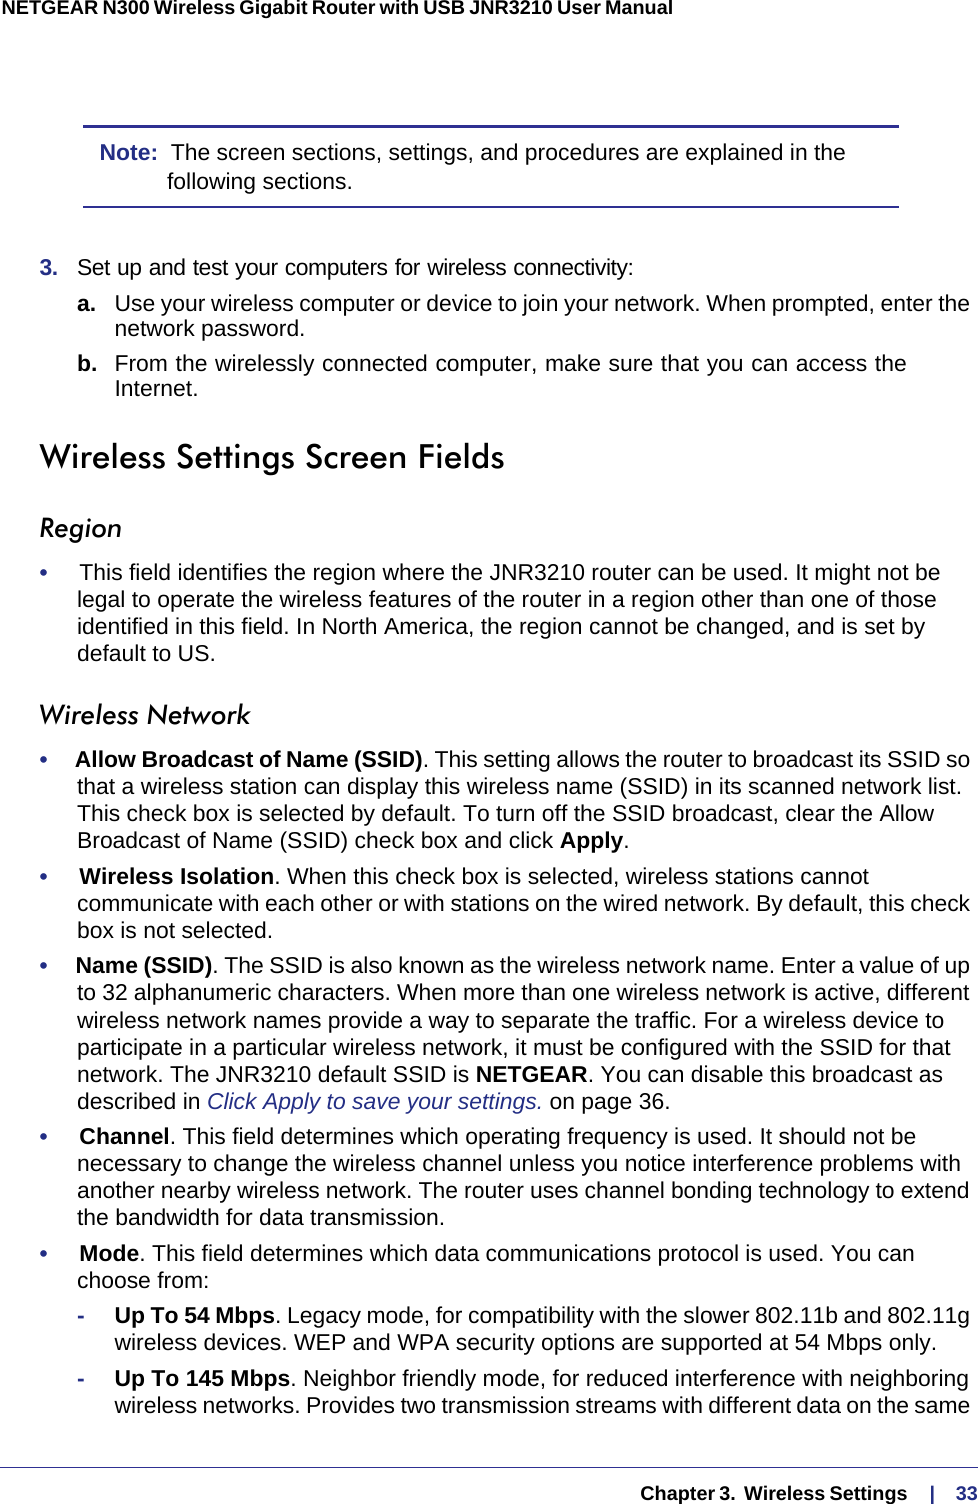   Chapter 3.  Wireless Settings     |    33NETGEAR N300 Wireless Gigabit Router with USB JNR3210 User Manual Note:  The screen sections, settings, and procedures are explained in the following sections.3.  Set up and test your computers for wireless connectivity:a. Use your wireless computer or device to join your network. When prompted, enter the network password.b.  From the wirelessly connected computer, make sure that you can access the Internet.Wireless Settings Screen FieldsRegion•     This field identifies the region where the JNR3210 router can be used. It might not be legal to operate the wireless features of the router in a region other than one of those identified in this field. In North America, the region cannot be changed, and is set by default to US.Wireless Network•     Allow Broadcast of Name (SSID). This setting allows the router to broadcast its SSID so that a wireless station can display this wireless name (SSID) in its scanned network list. This check box is selected by default. To turn off the SSID broadcast, clear the Allow Broadcast of Name (SSID) check box and click Apply.•     Wireless Isolation. When this check box is selected, wireless stations cannot communicate with each other or with stations on the wired network. By default, this check box is not selected.•     Name (SSID). The SSID is also known as the wireless network name. Enter a value of up to 32 alphanumeric characters. When more than one wireless network is active, different wireless network names provide a way to separate the traffic. For a wireless device to participate in a particular wireless network, it must be configured with the SSID for that network. The JNR3210 default SSID is NETGEAR. You can disable this broadcast as described in Click Apply to save your settings. on page  36. •     Channel. This field determines which operating frequency is used. It should not be necessary to change the wireless channel unless you notice interference problems with another nearby wireless network. The router uses channel bonding technology to extend the bandwidth for data transmission. •     Mode. This field determines which data communications protocol is used. You can choose from:-Up To 54 Mbps. Legacy mode, for compatibility with the slower 802.11b and 802.11g wireless devices. WEP and WPA security options are supported at 54 Mbps only.-Up To 145 Mbps. Neighbor friendly mode, for reduced interference with neighboring wireless networks. Provides two transmission streams with different data on the same 